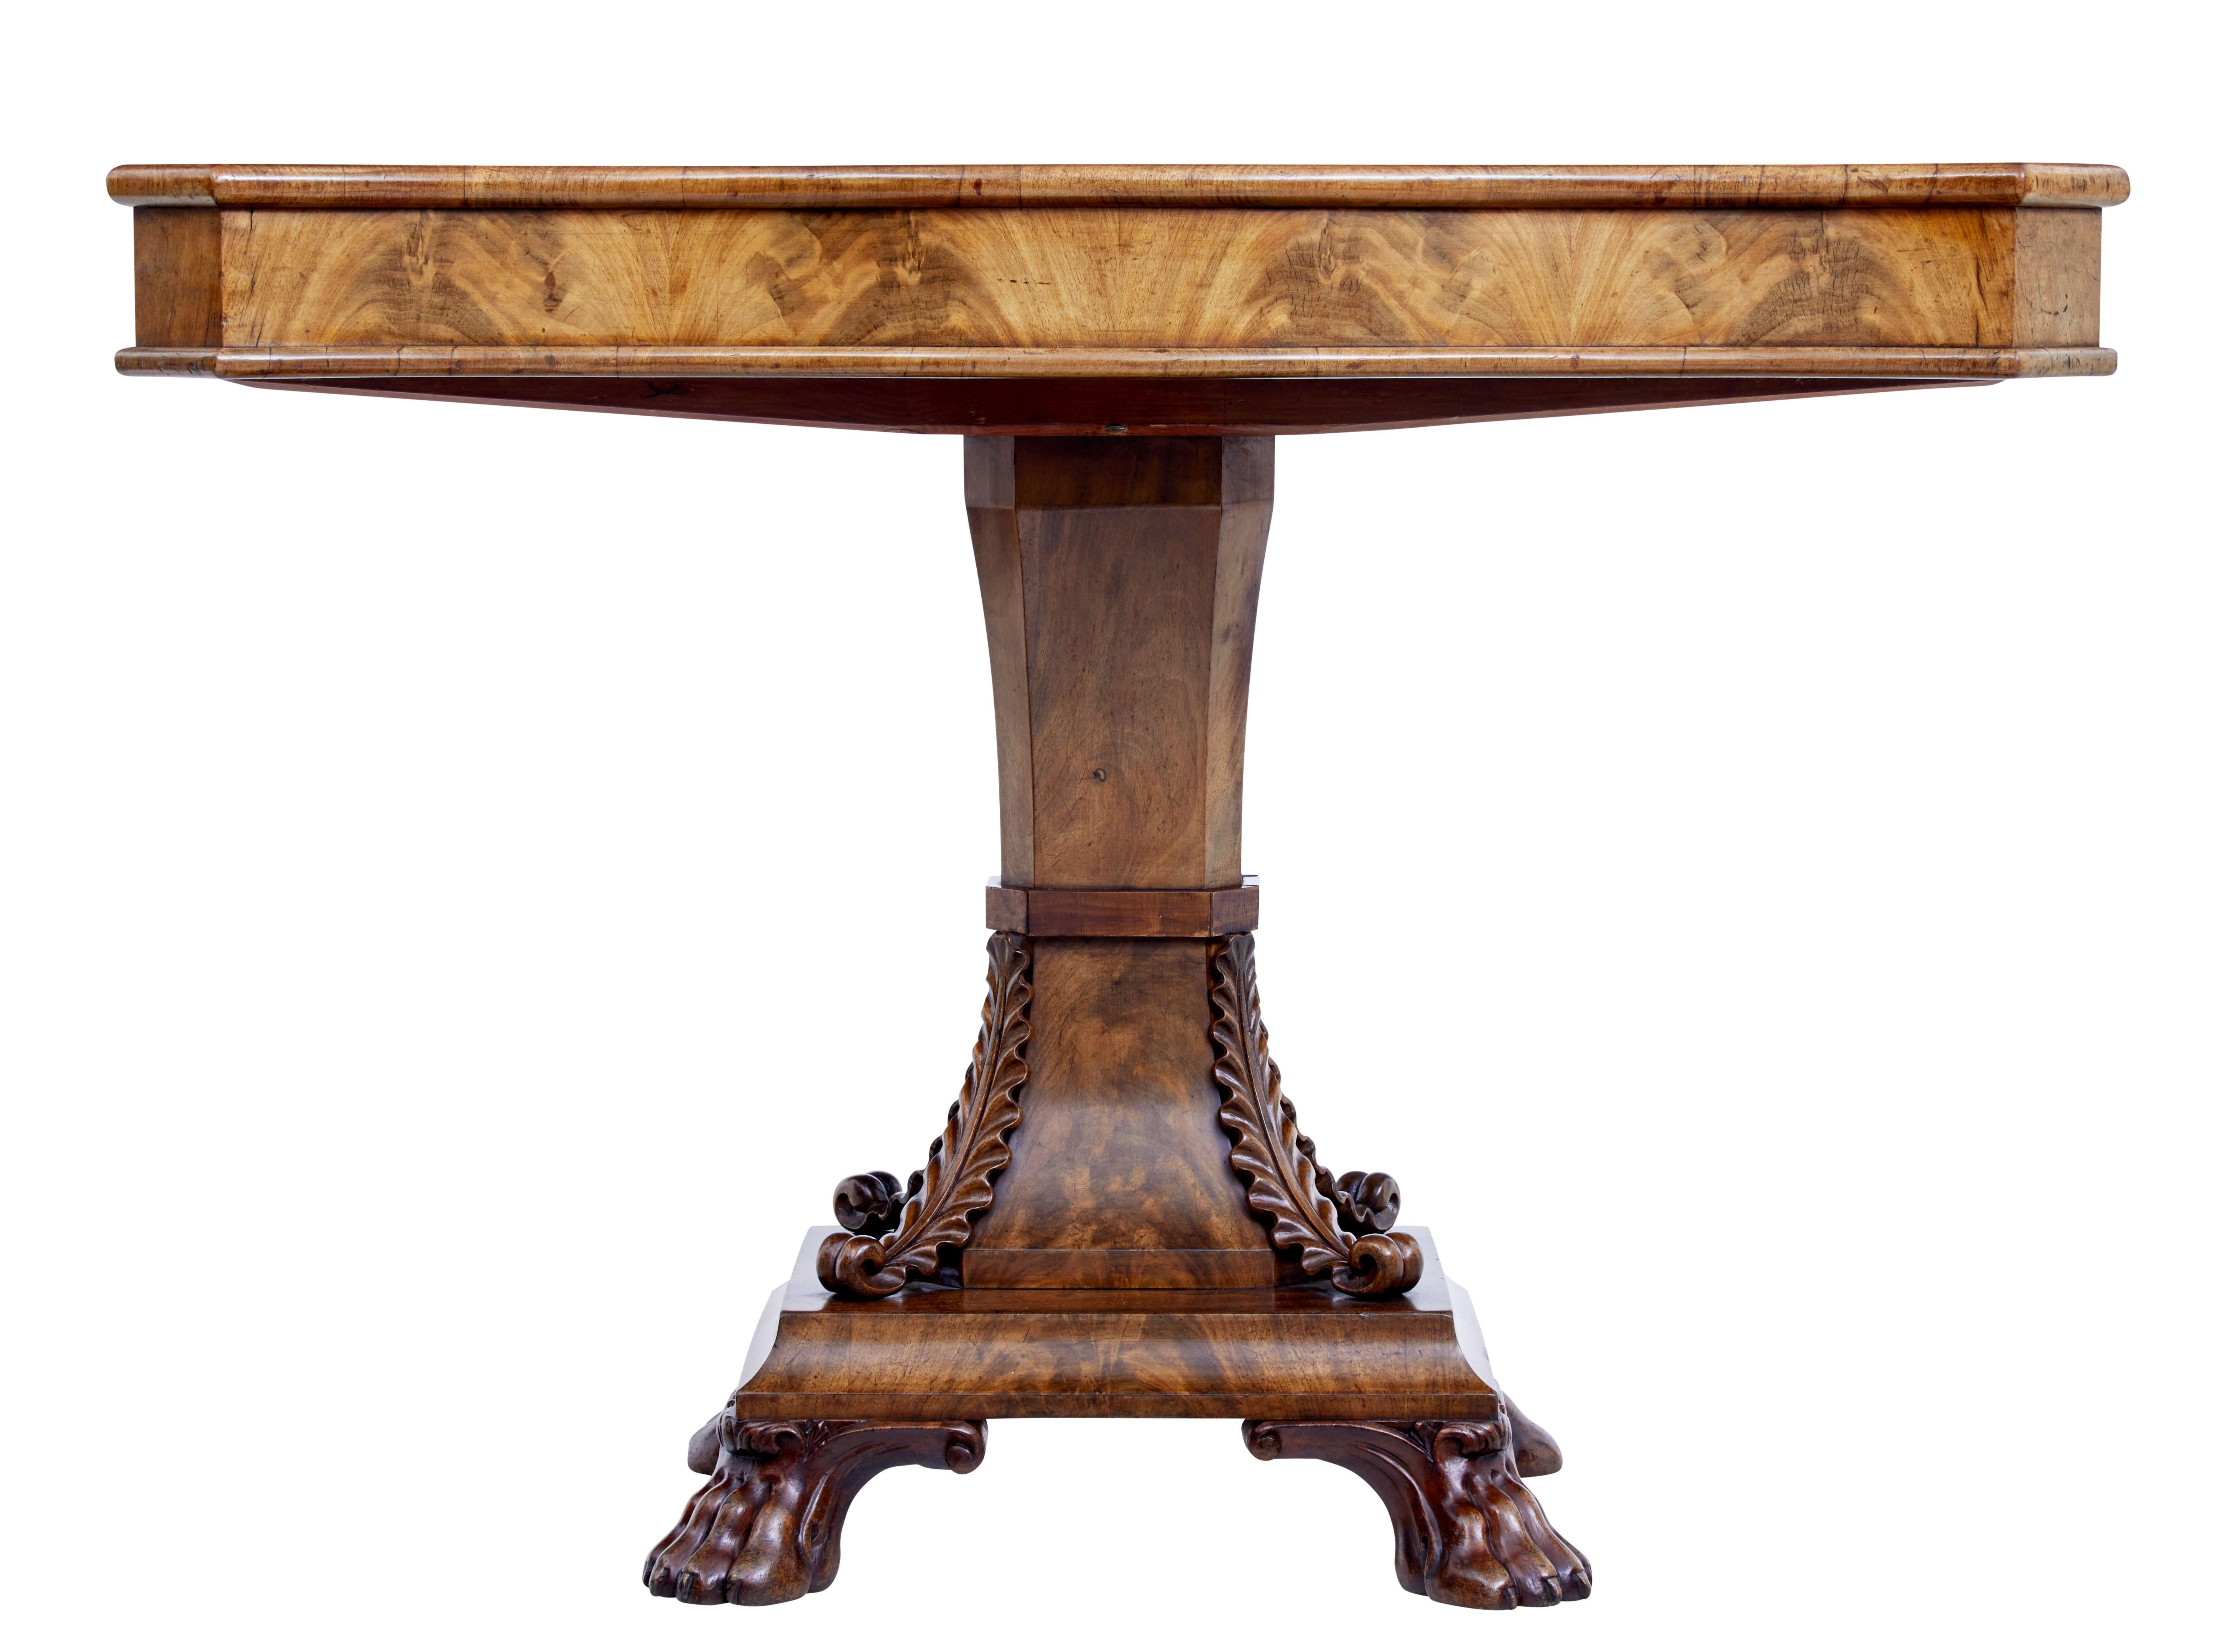 Mid-19th century carved Swedish flame mahogany centre table, circa 1840.

Serpentine shaped top with matching quarter veneers. No drawer, making this a center table, but could be used as a sofa table.

Standing on a fluted stem, with applied